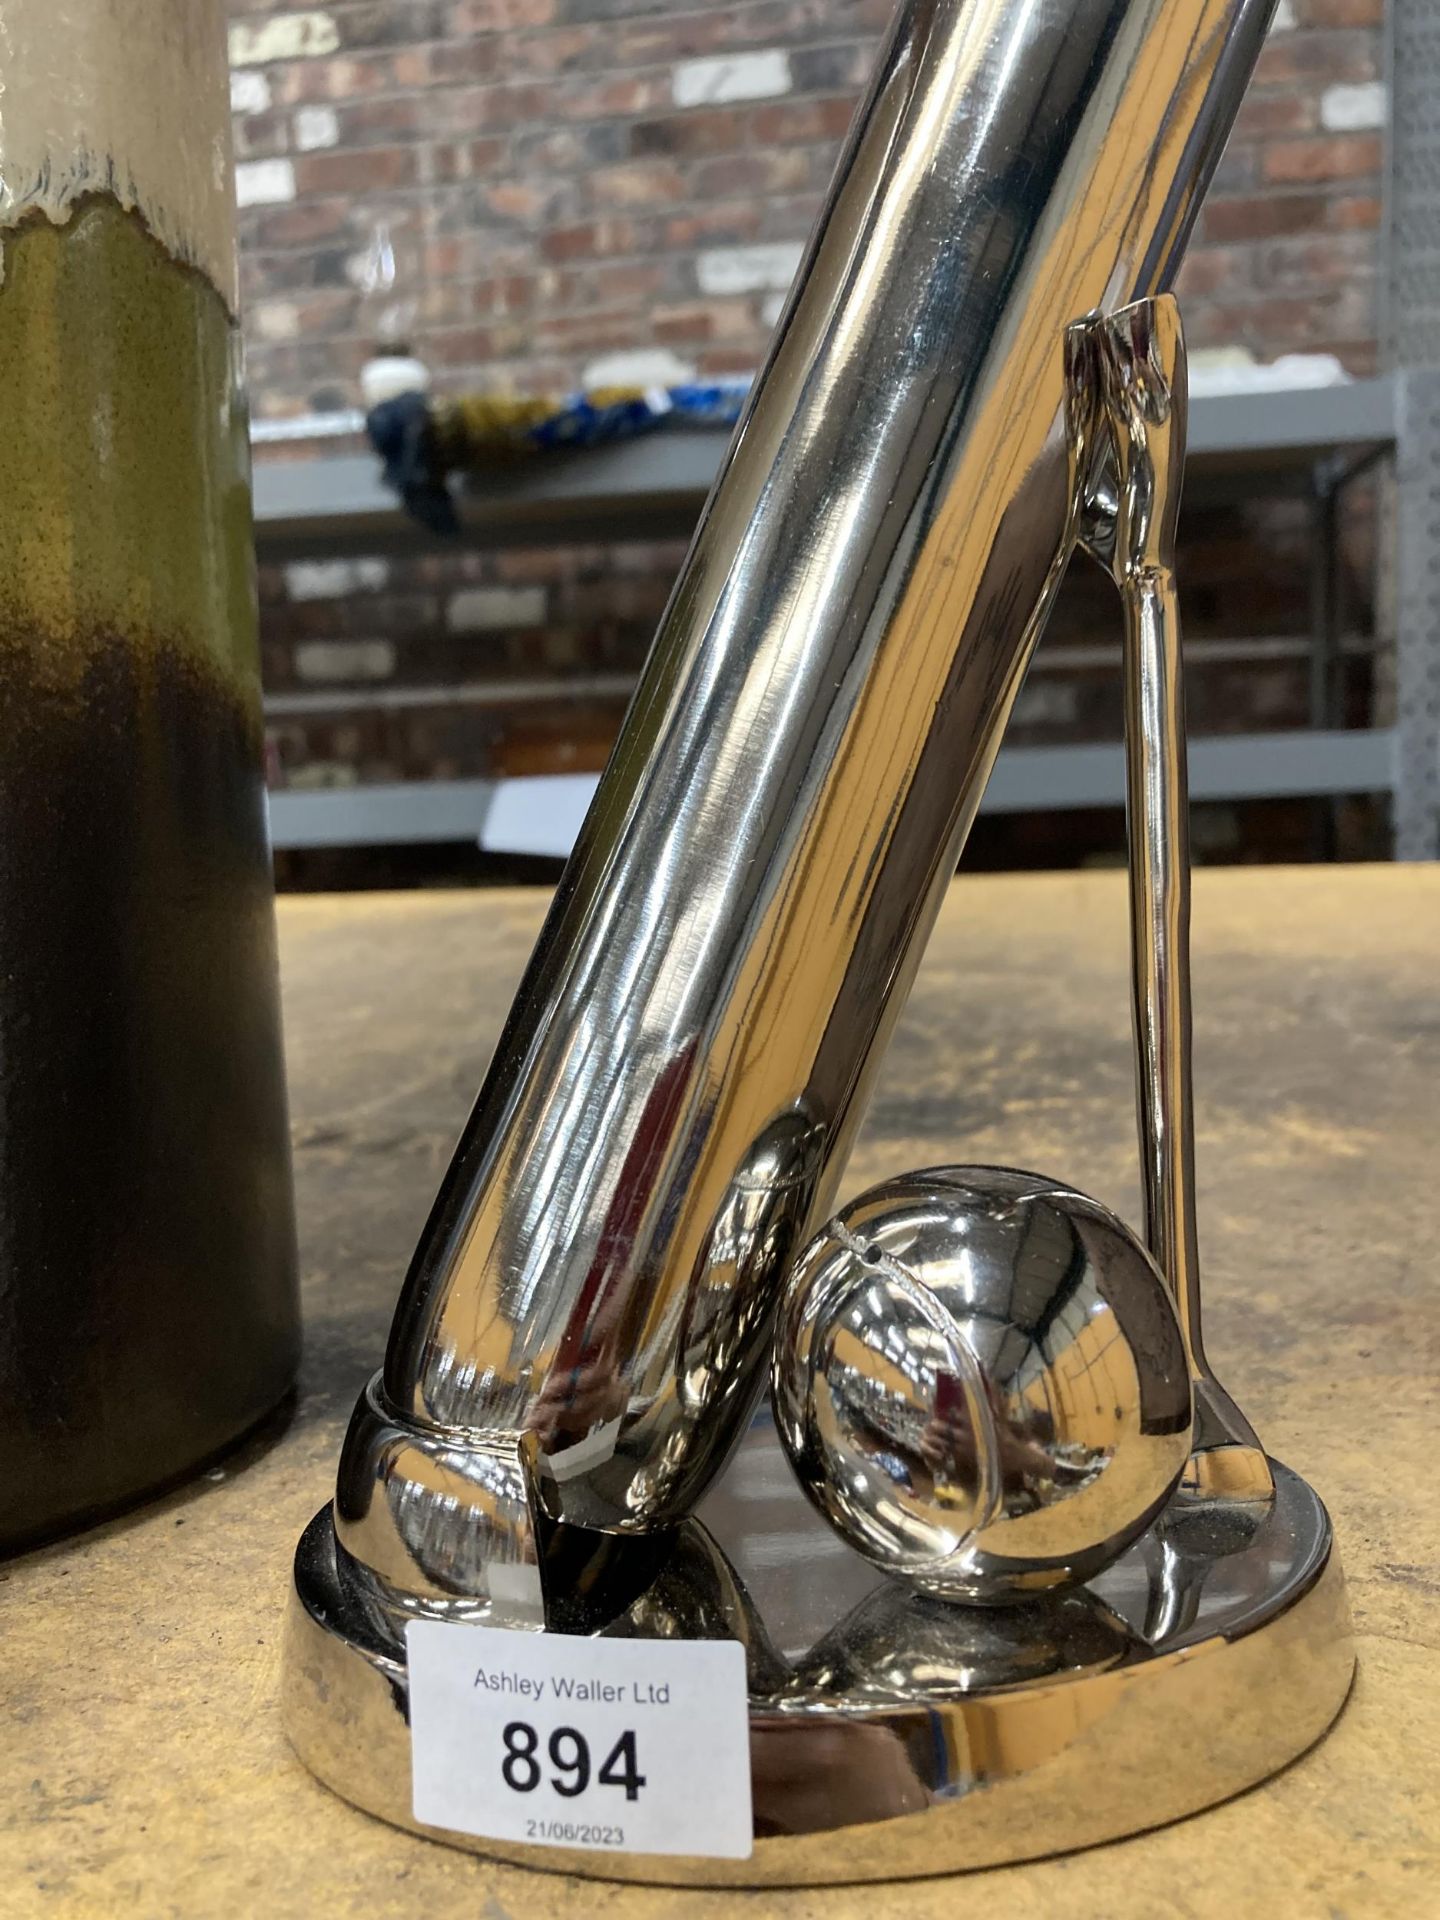 A CHROME BASEBALL BAT AND BALL ON A STAND - Image 2 of 3